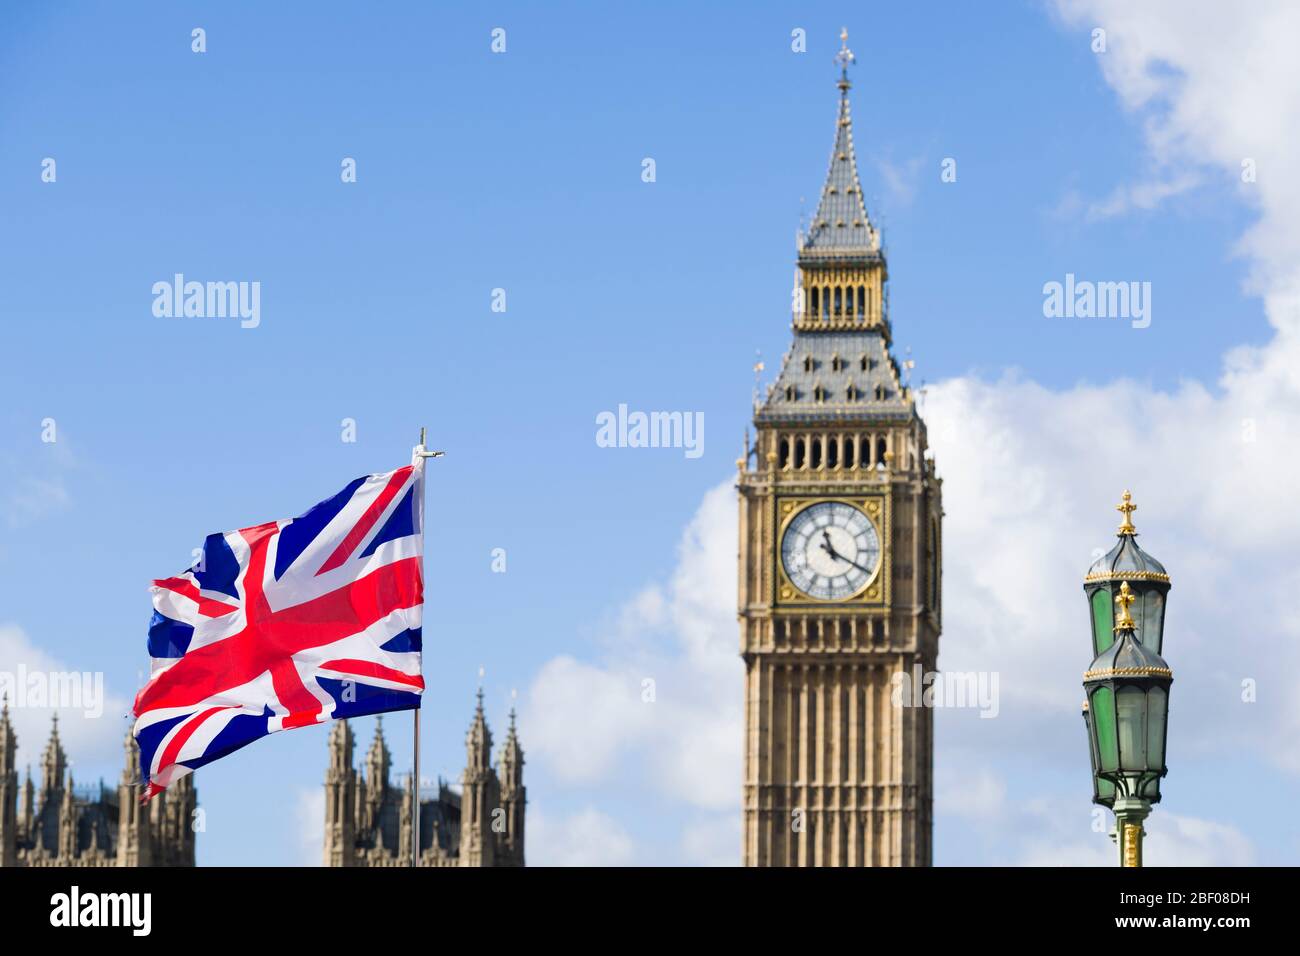 The Elizabeth Tower which houses the clock is popularly know as 'Big Ben' part of the Palace of Westminster commonly known as the Houses of Parliament Stock Photo